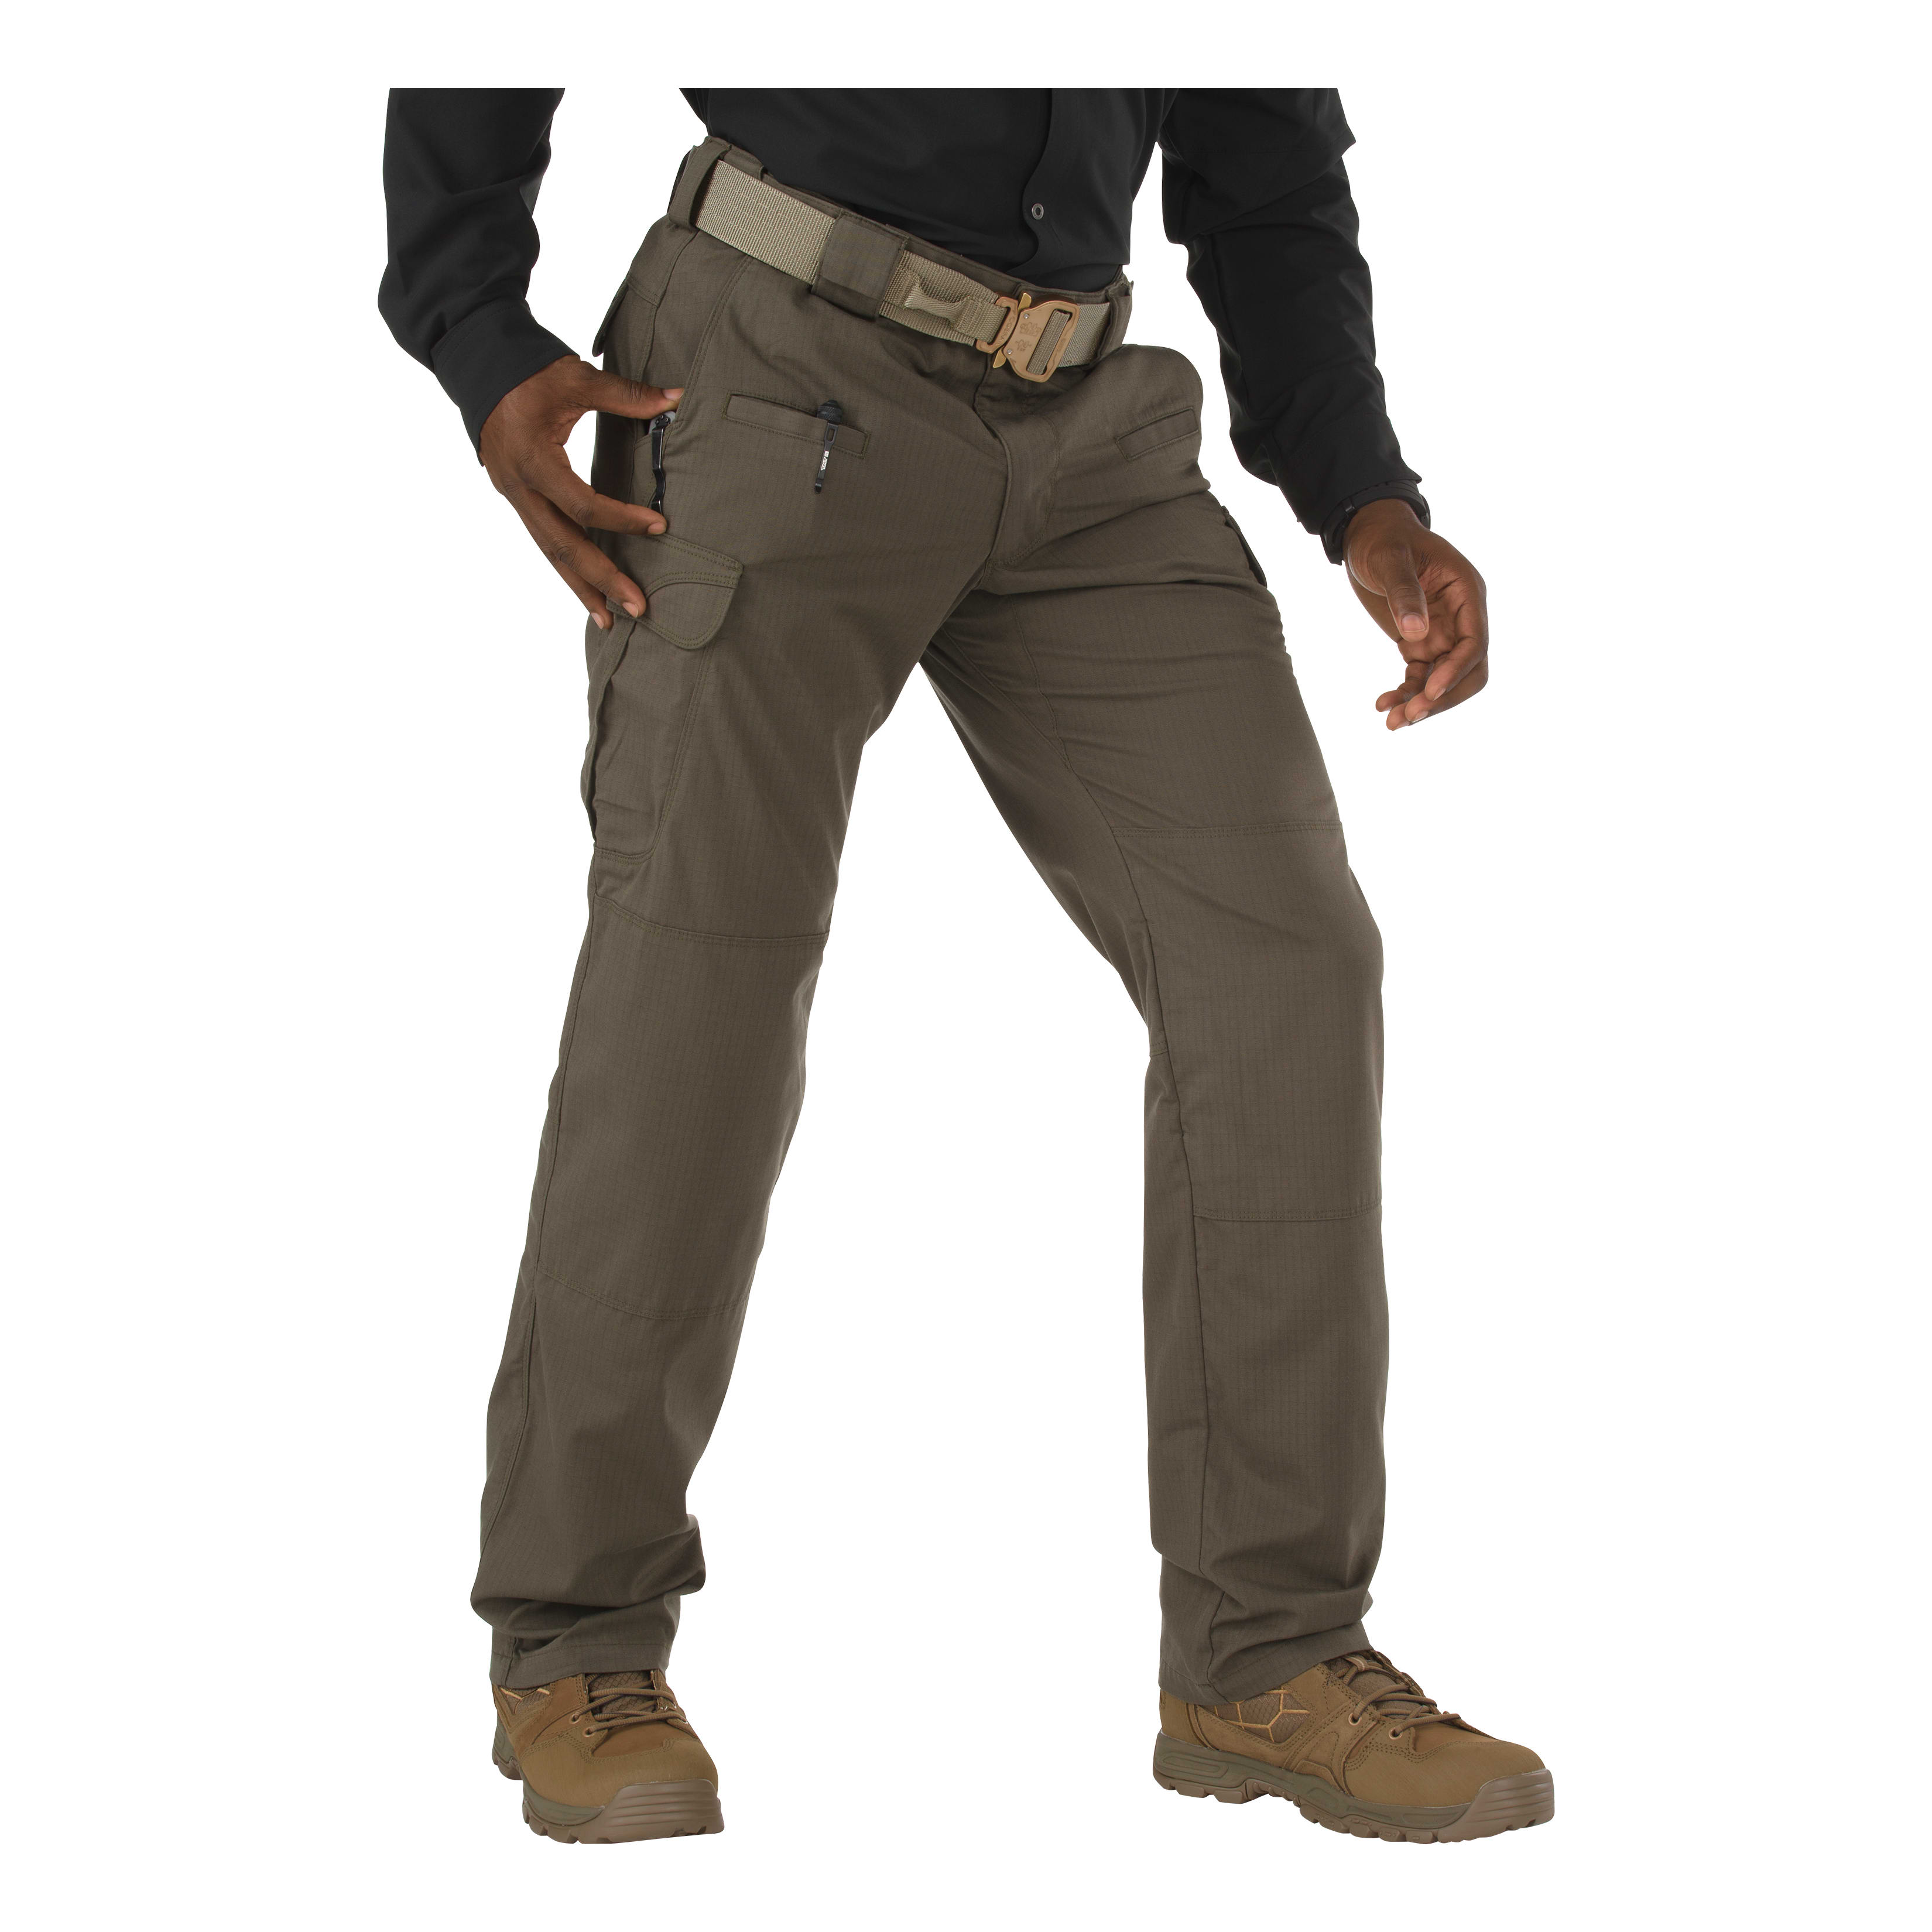  5.11 Tactical Pants,OD Green,28Wx32L : Clothing, Shoes & Jewelry